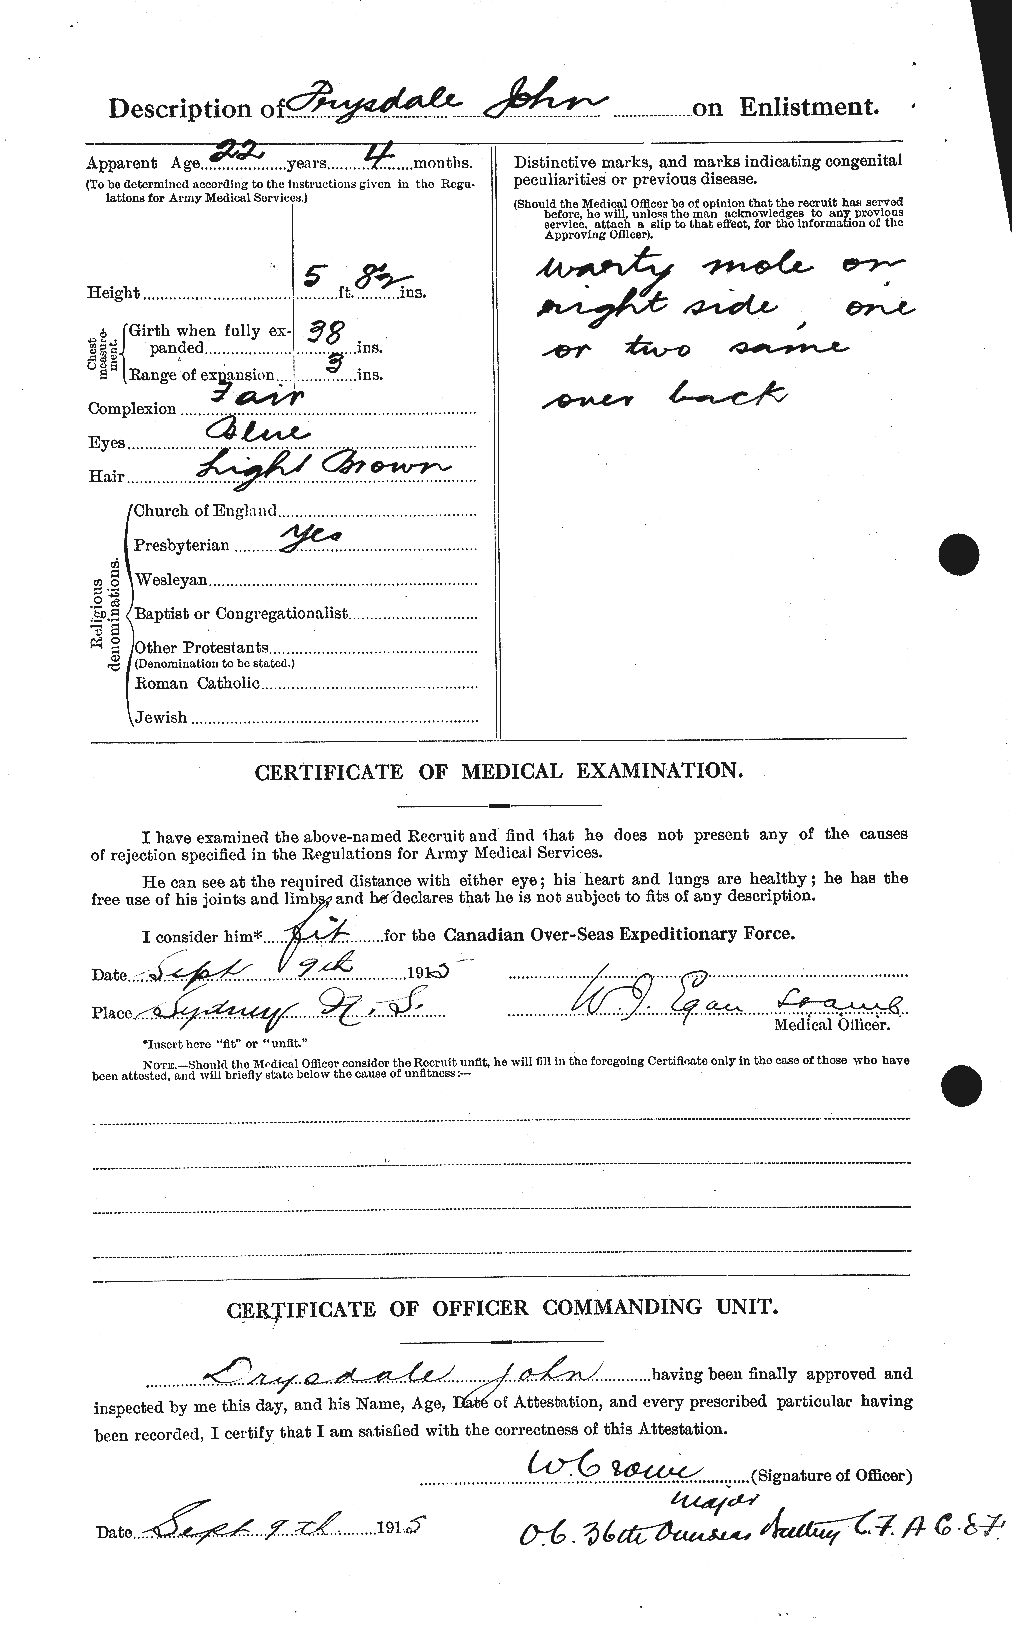 Personnel Records of the First World War - CEF 303187b